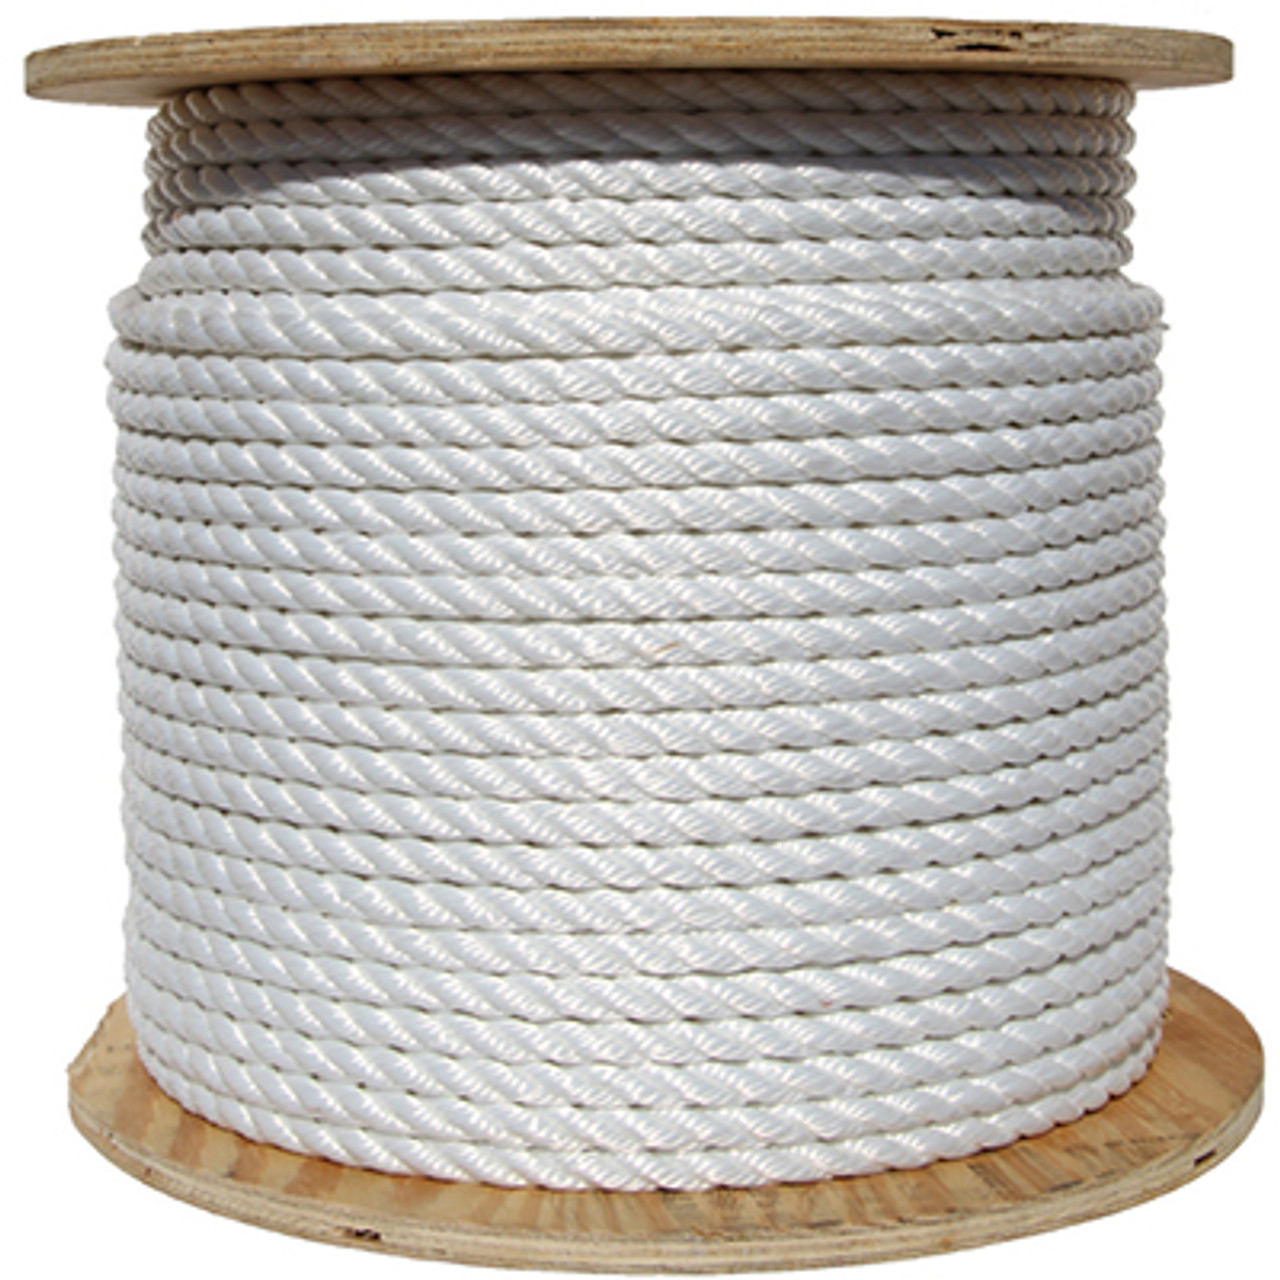 1/4 Inch Flagpole Rope Spool (1000 ft), no wire center